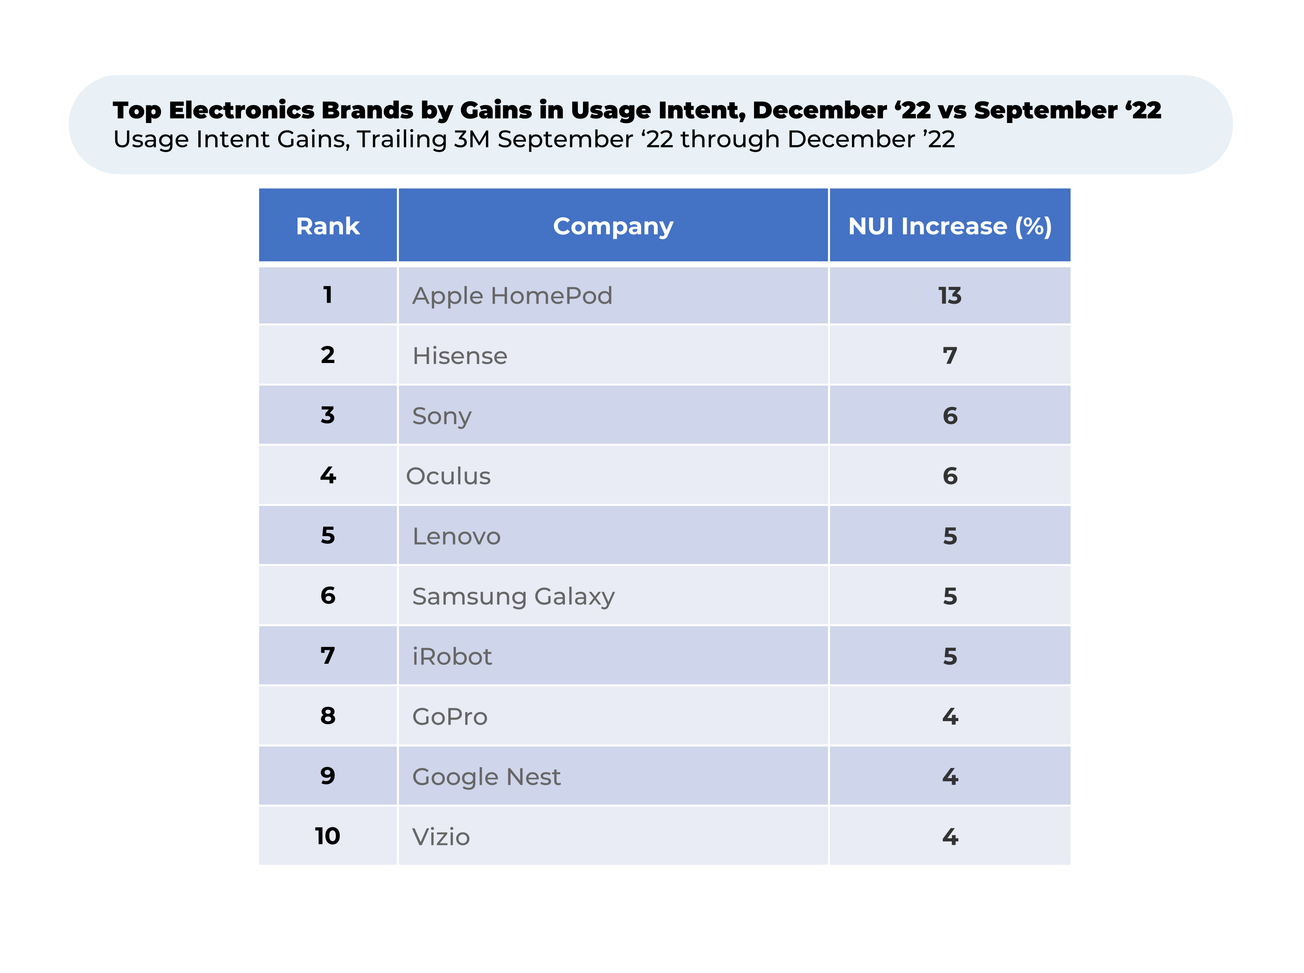 Top Electronics Brands by Gains in Usage Intent, December ‘22 vs September ‘22